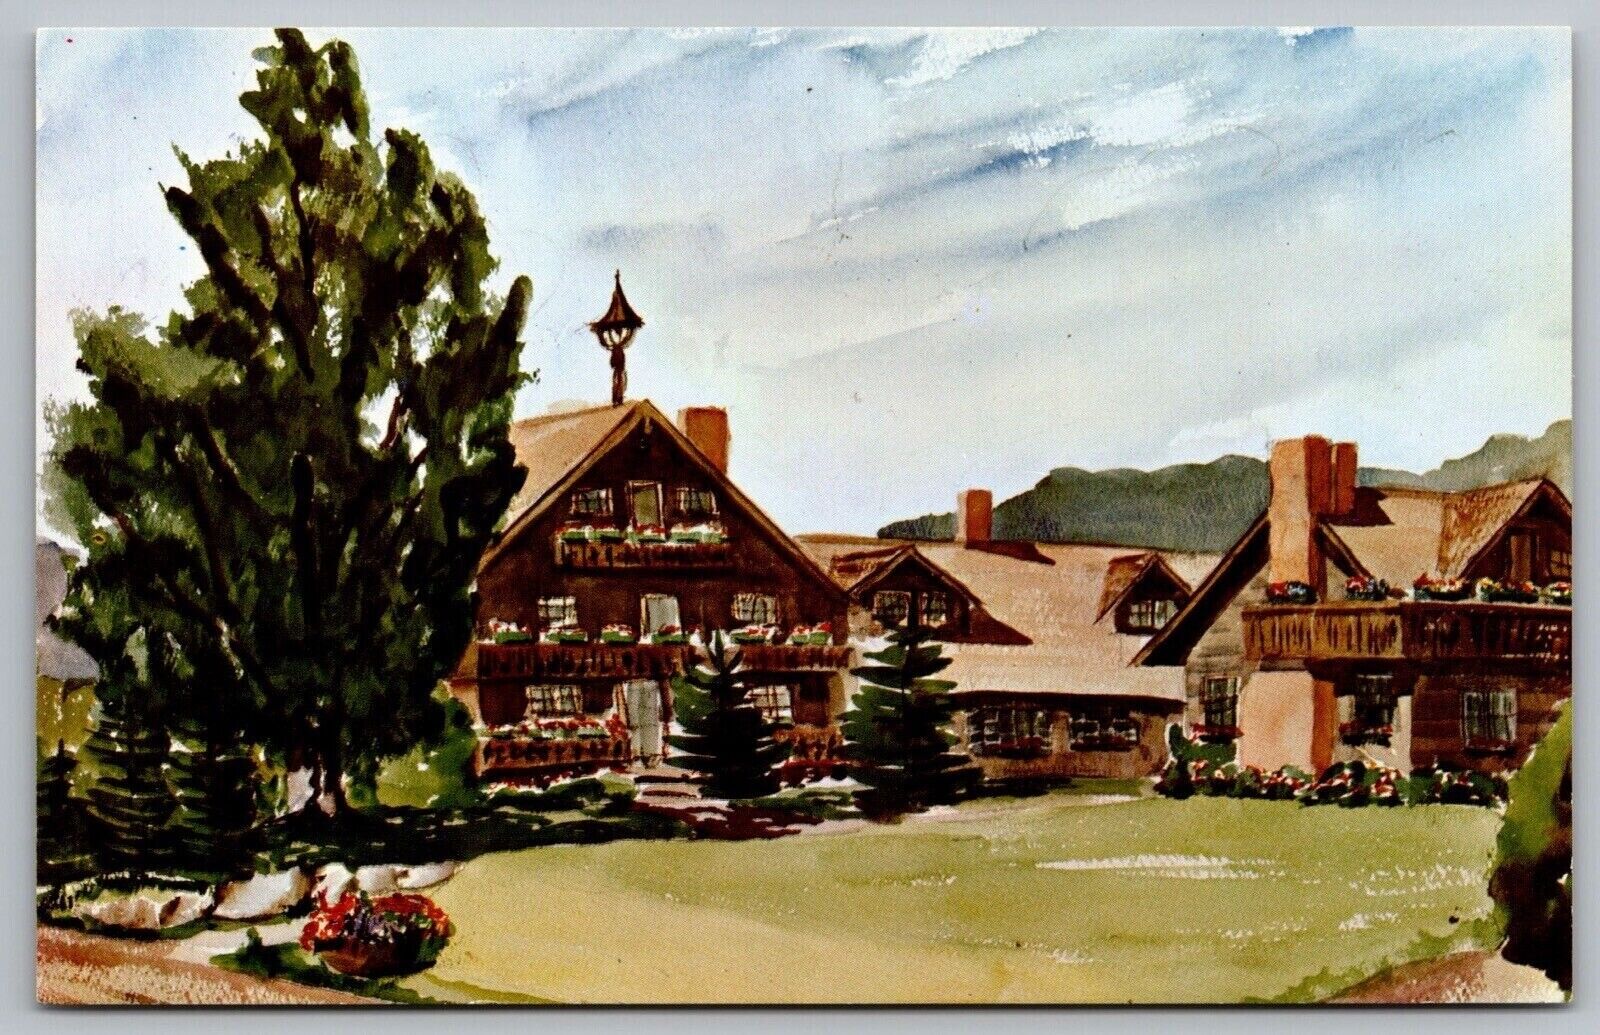 Stowe Vermont Trapp Family Lodge Scenic Landmark Front View Chrome Postcard